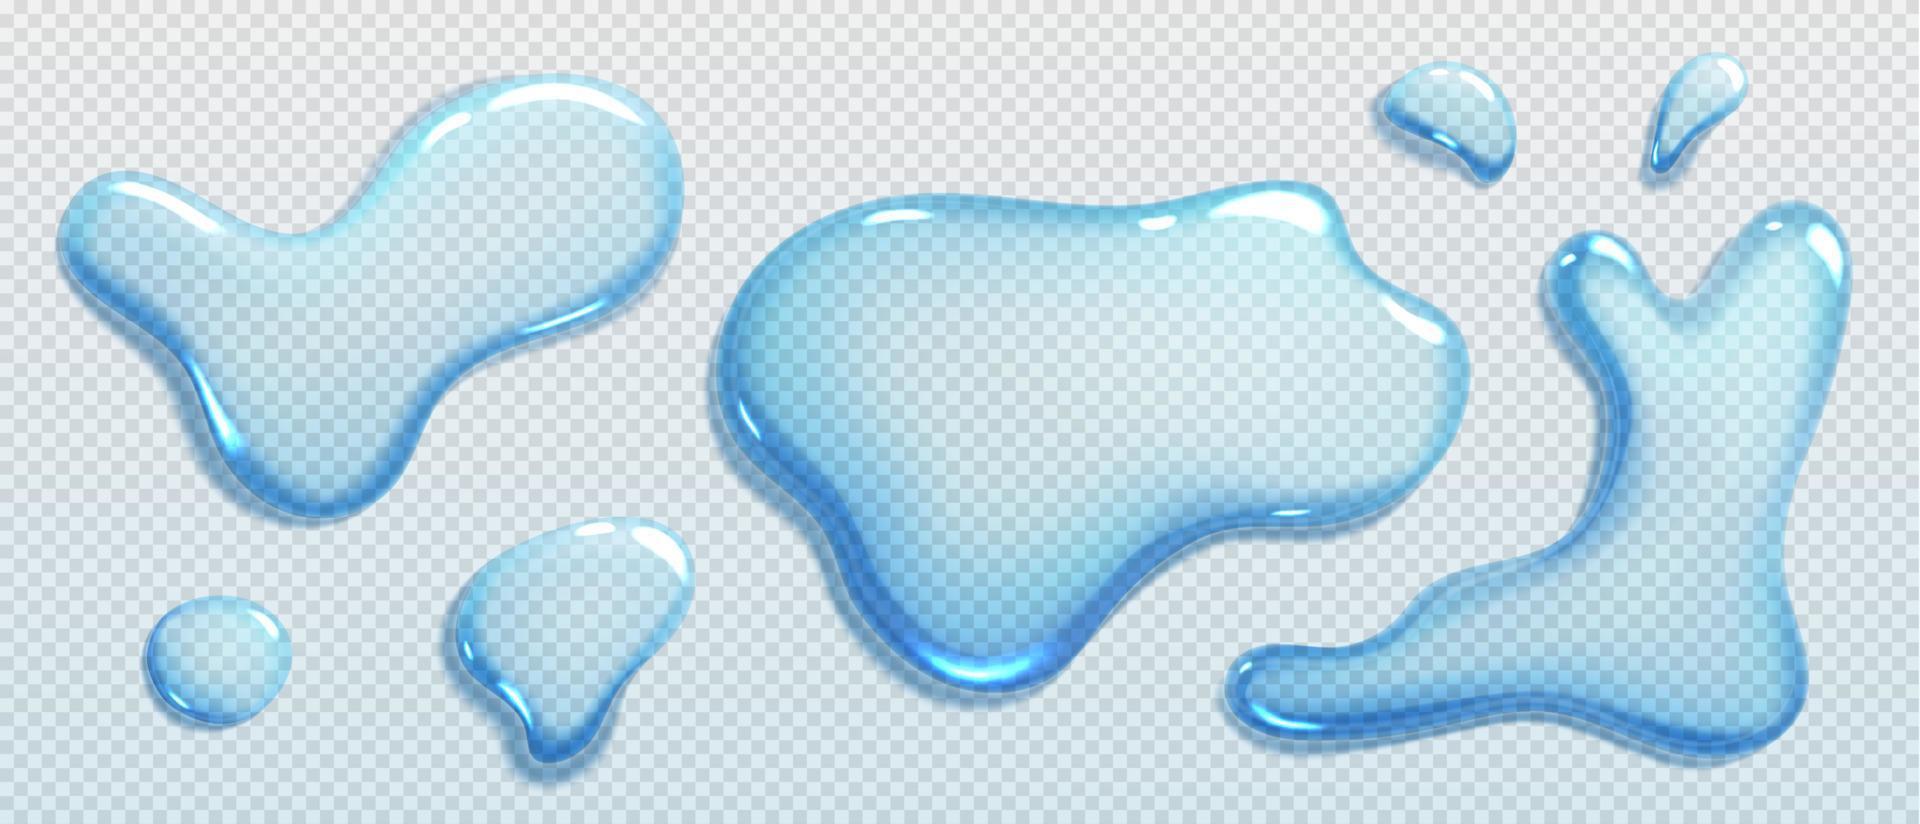 Liquid spills, water drops and puddles vector